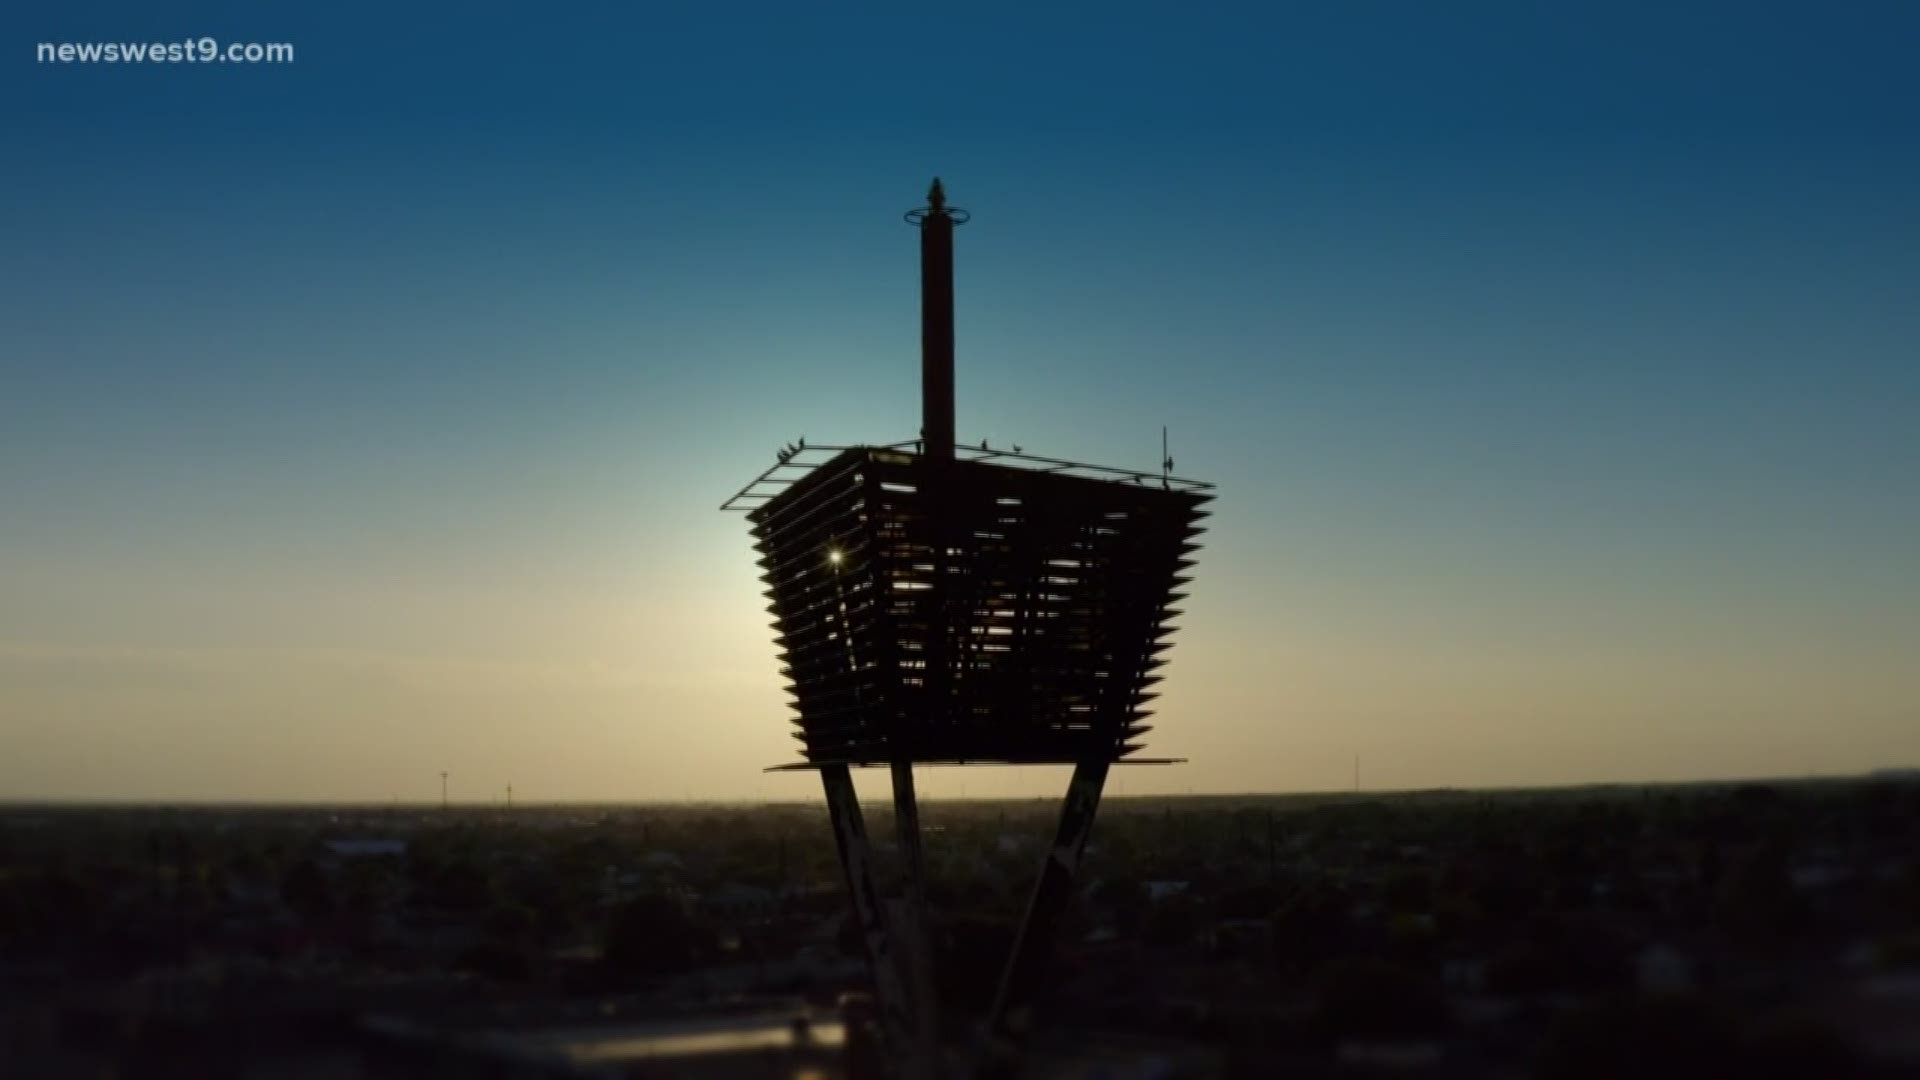 The film focuses on the Odessa Spire, which is now the tallest lighted public art installation in Texas.